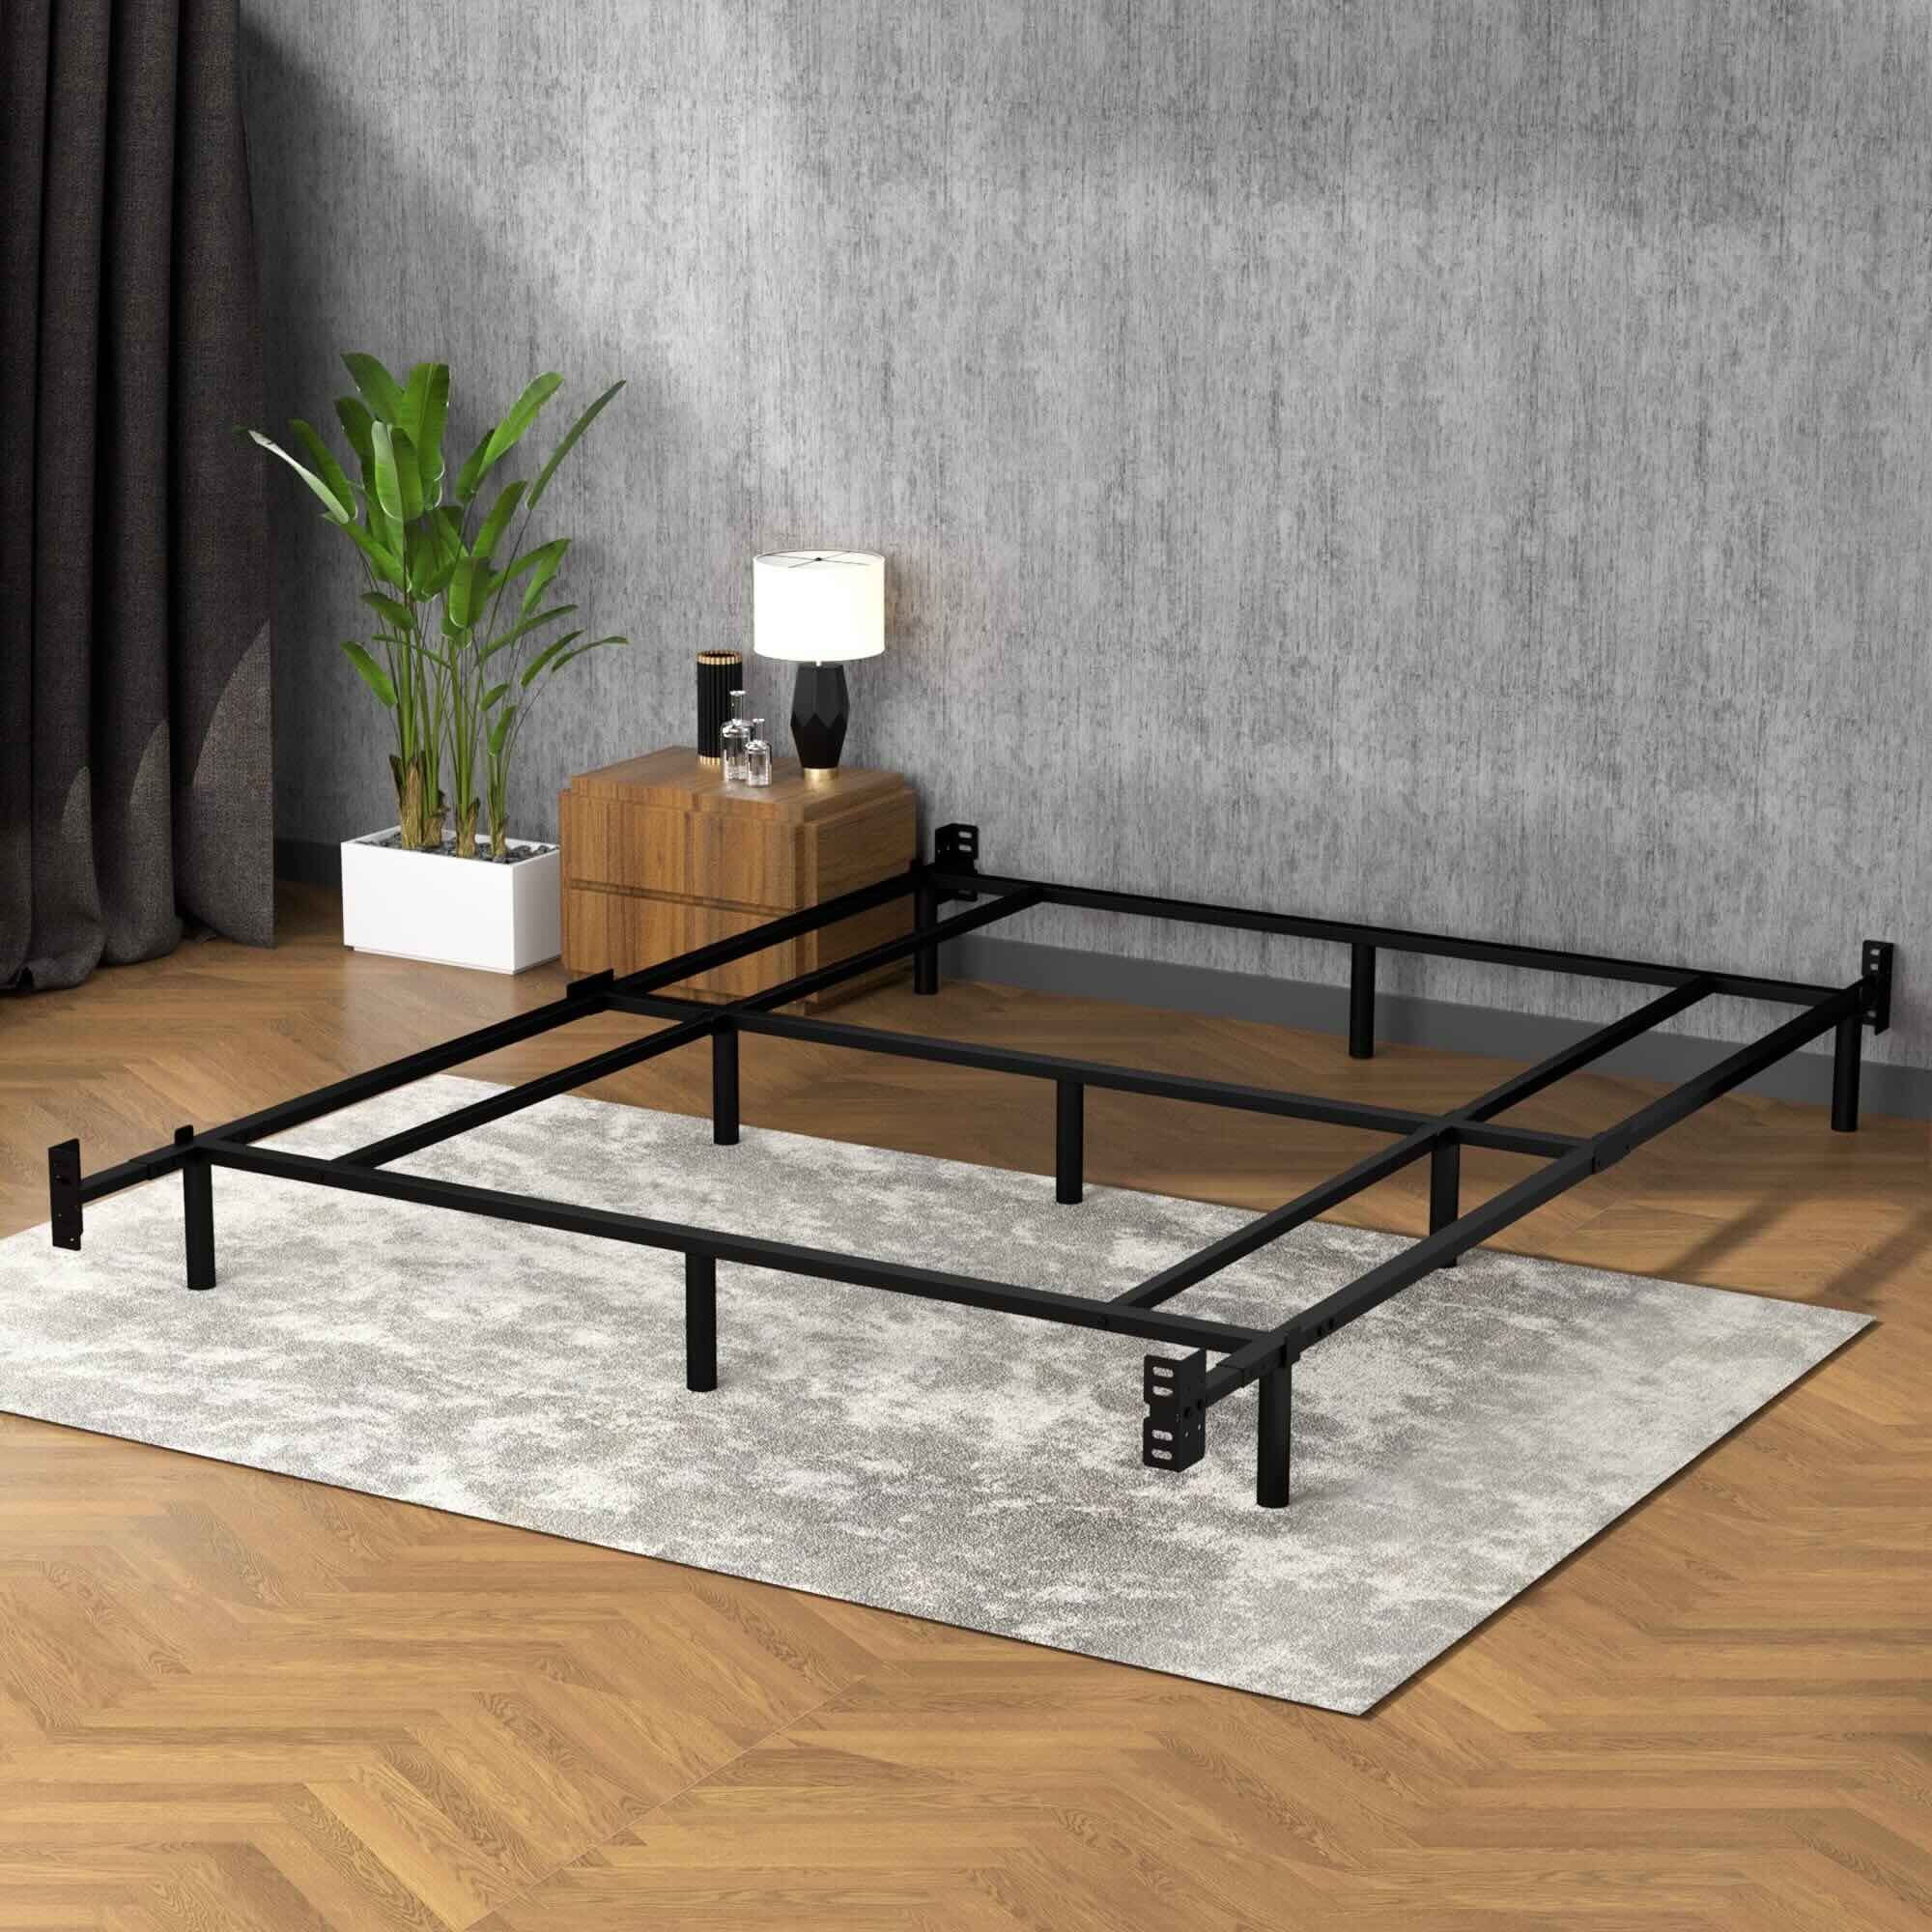 How To Assemble A Queen Size Bed Frame 1699699994 